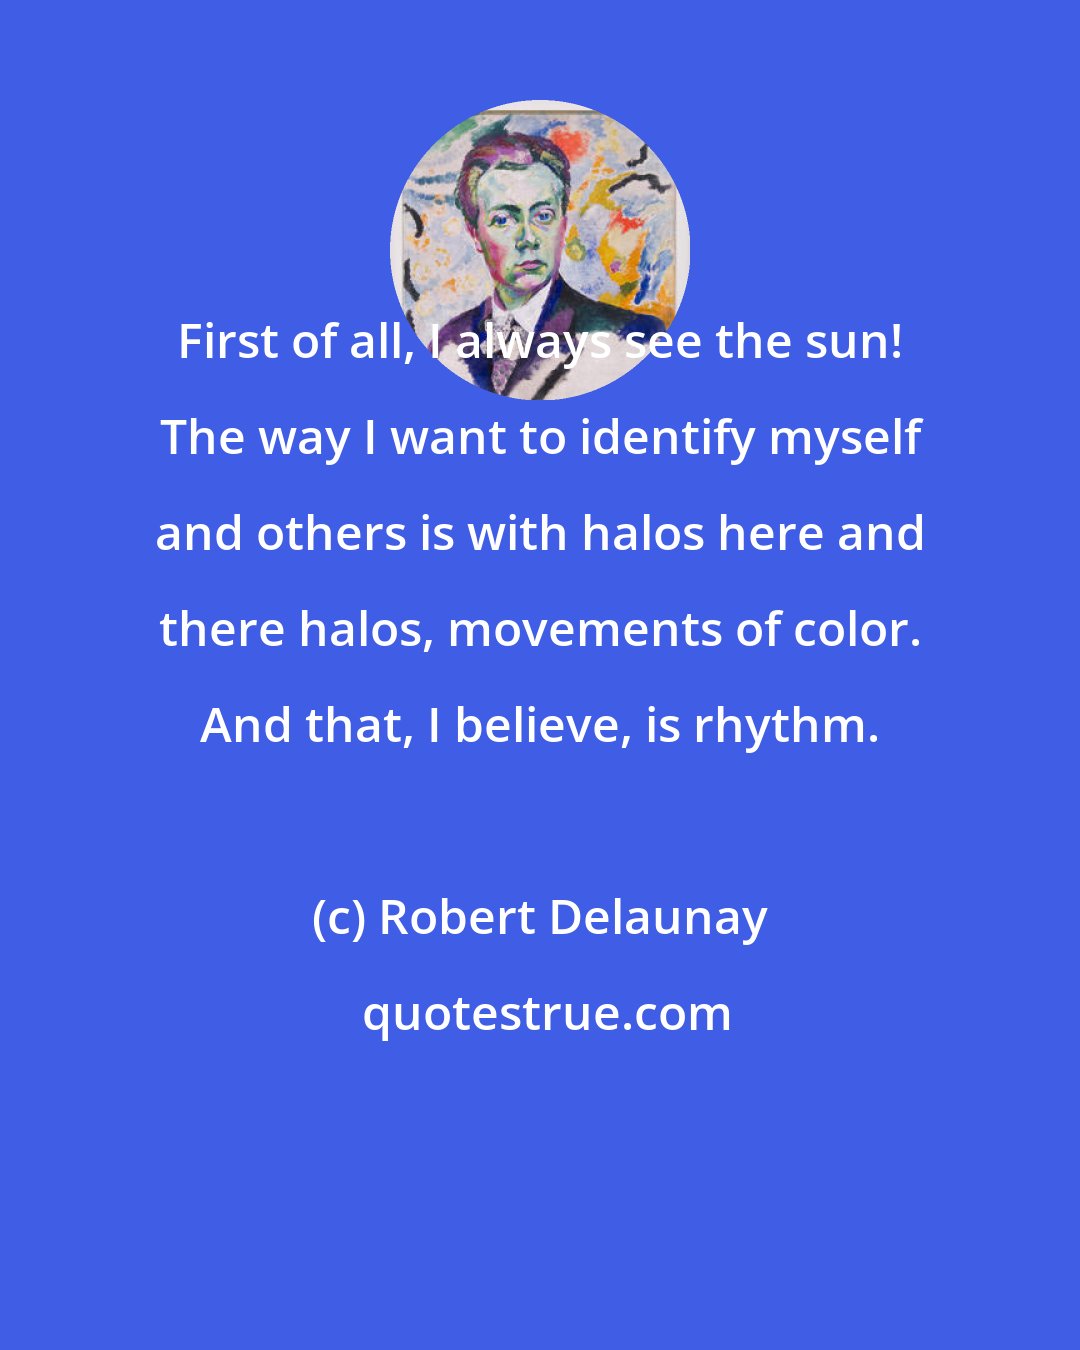 Robert Delaunay: First of all, I always see the sun! The way I want to identify myself and others is with halos here and there halos, movements of color. And that, I believe, is rhythm.